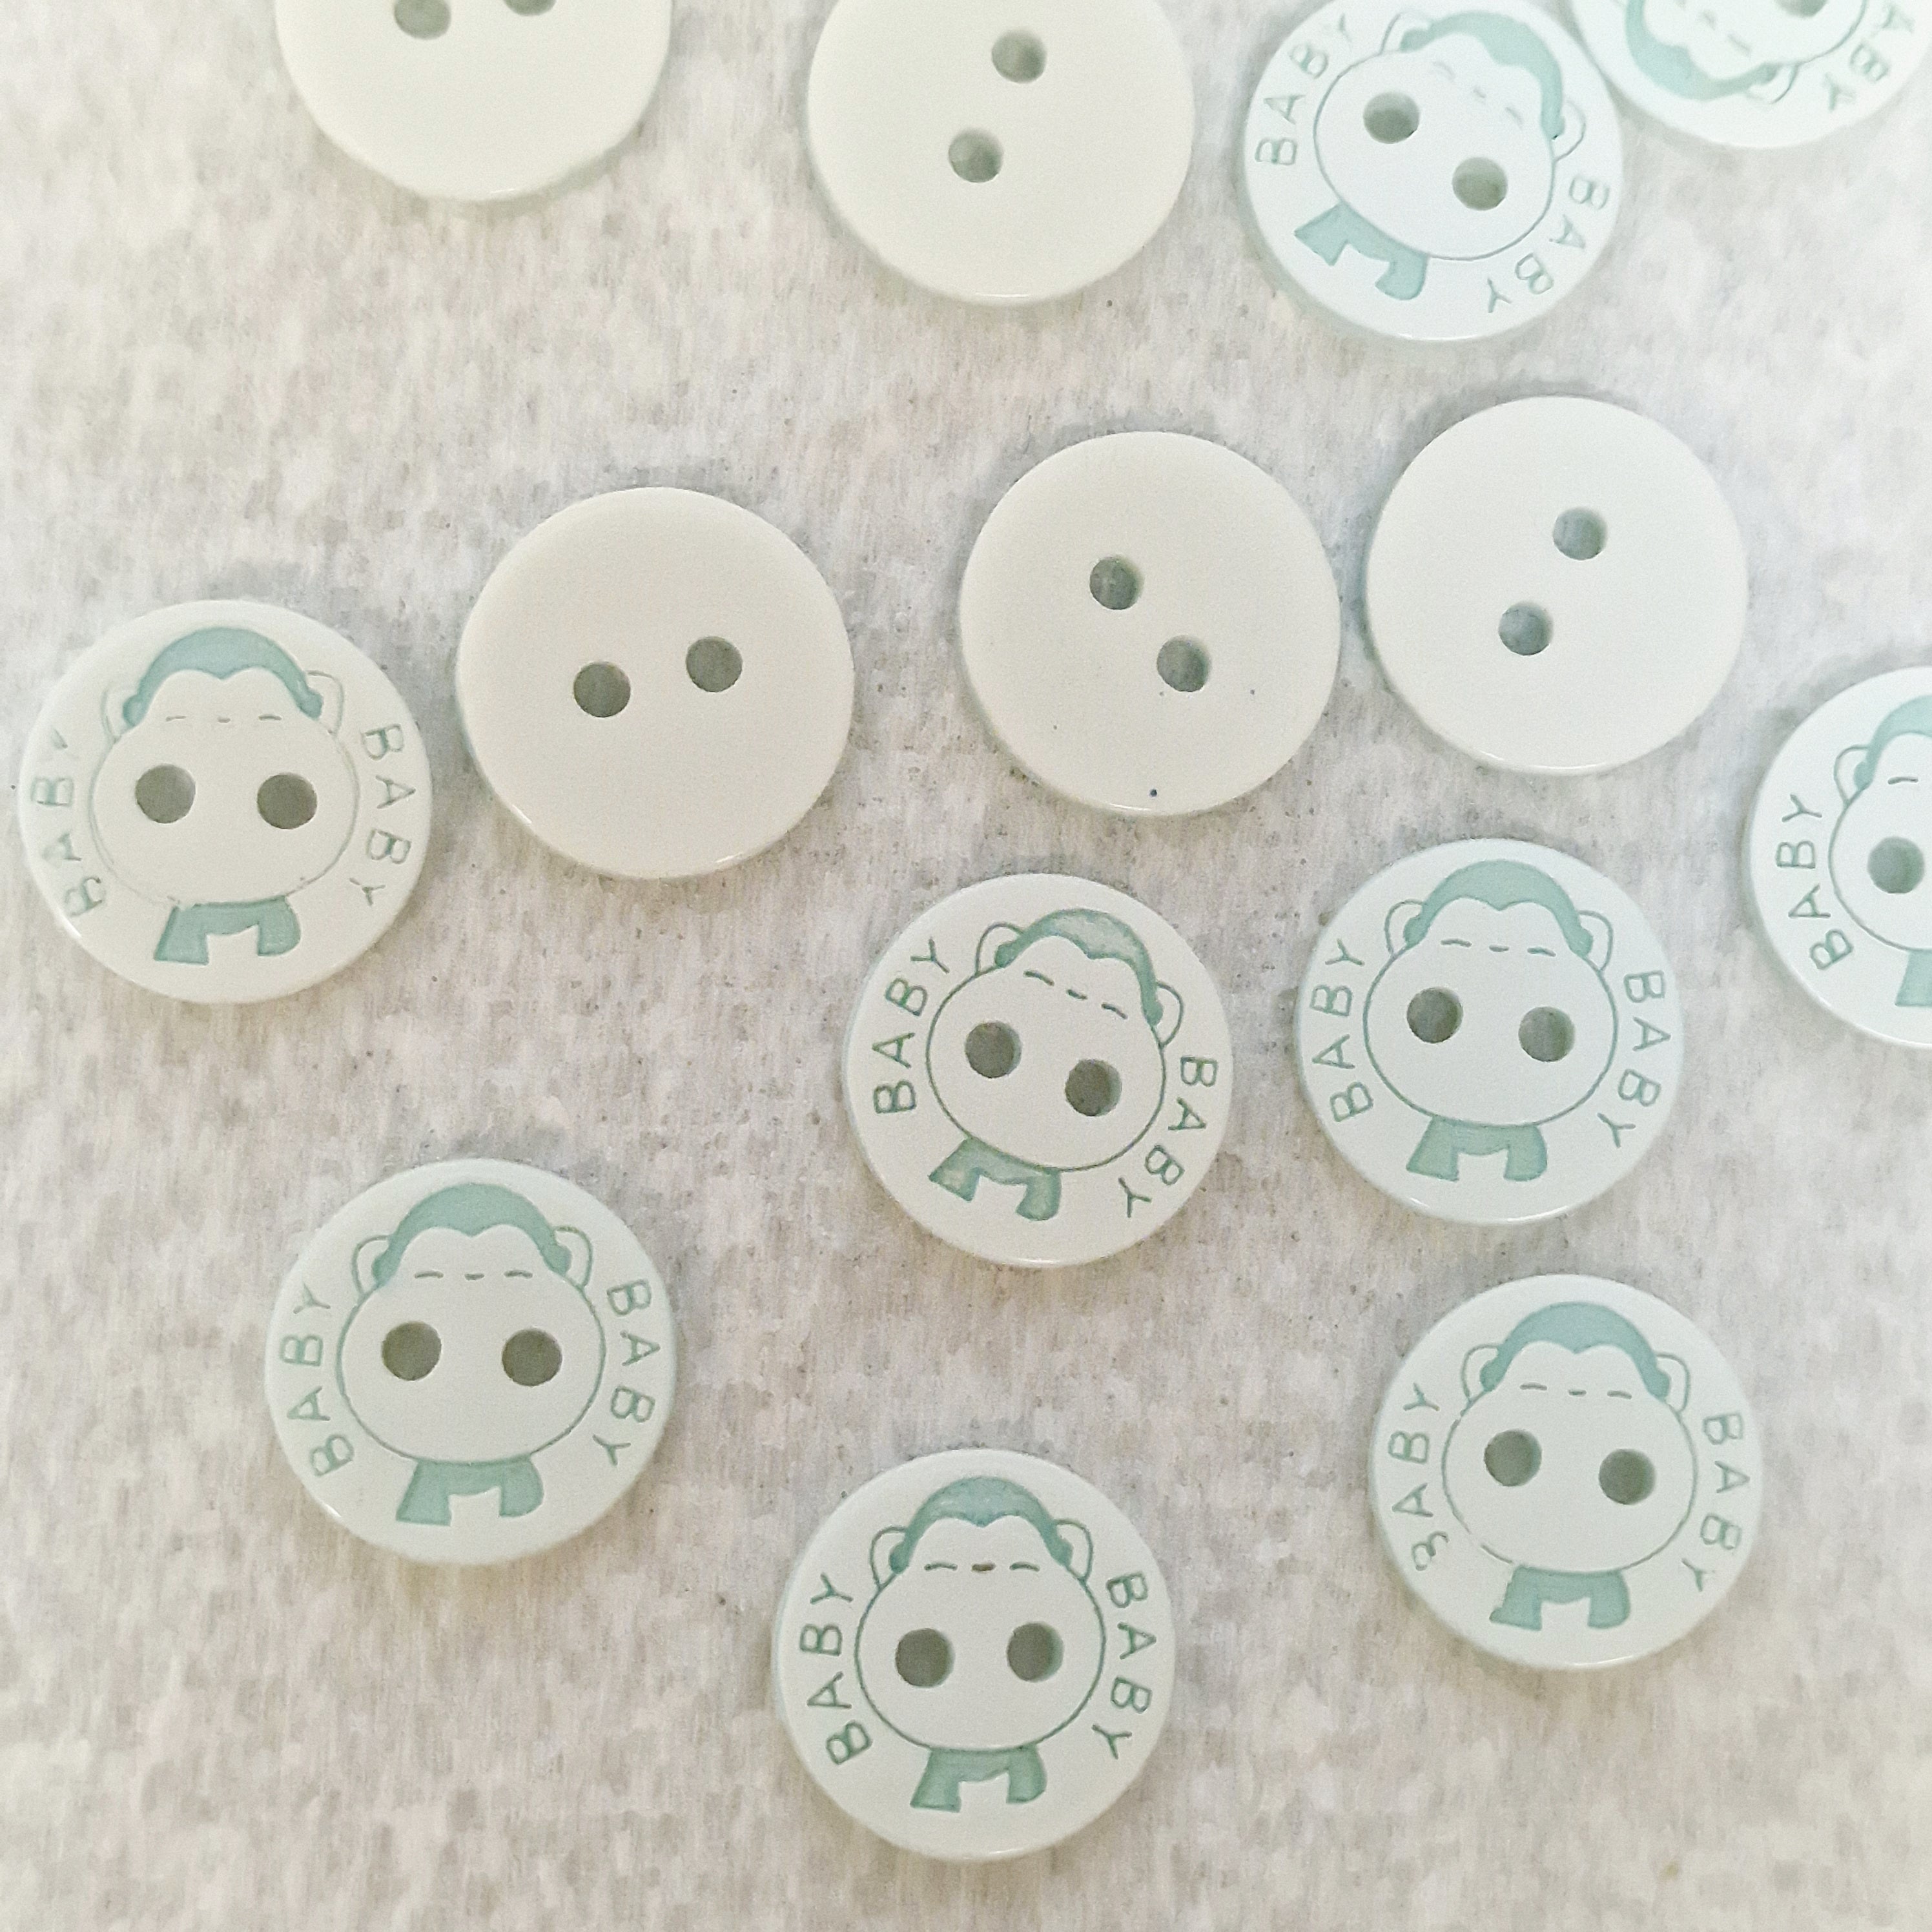 MajorCrafts 48pcs 12.5mm Pale Blue Green & White 'Baby' Printed 2 Holes Small Round Resin Sewing Buttons